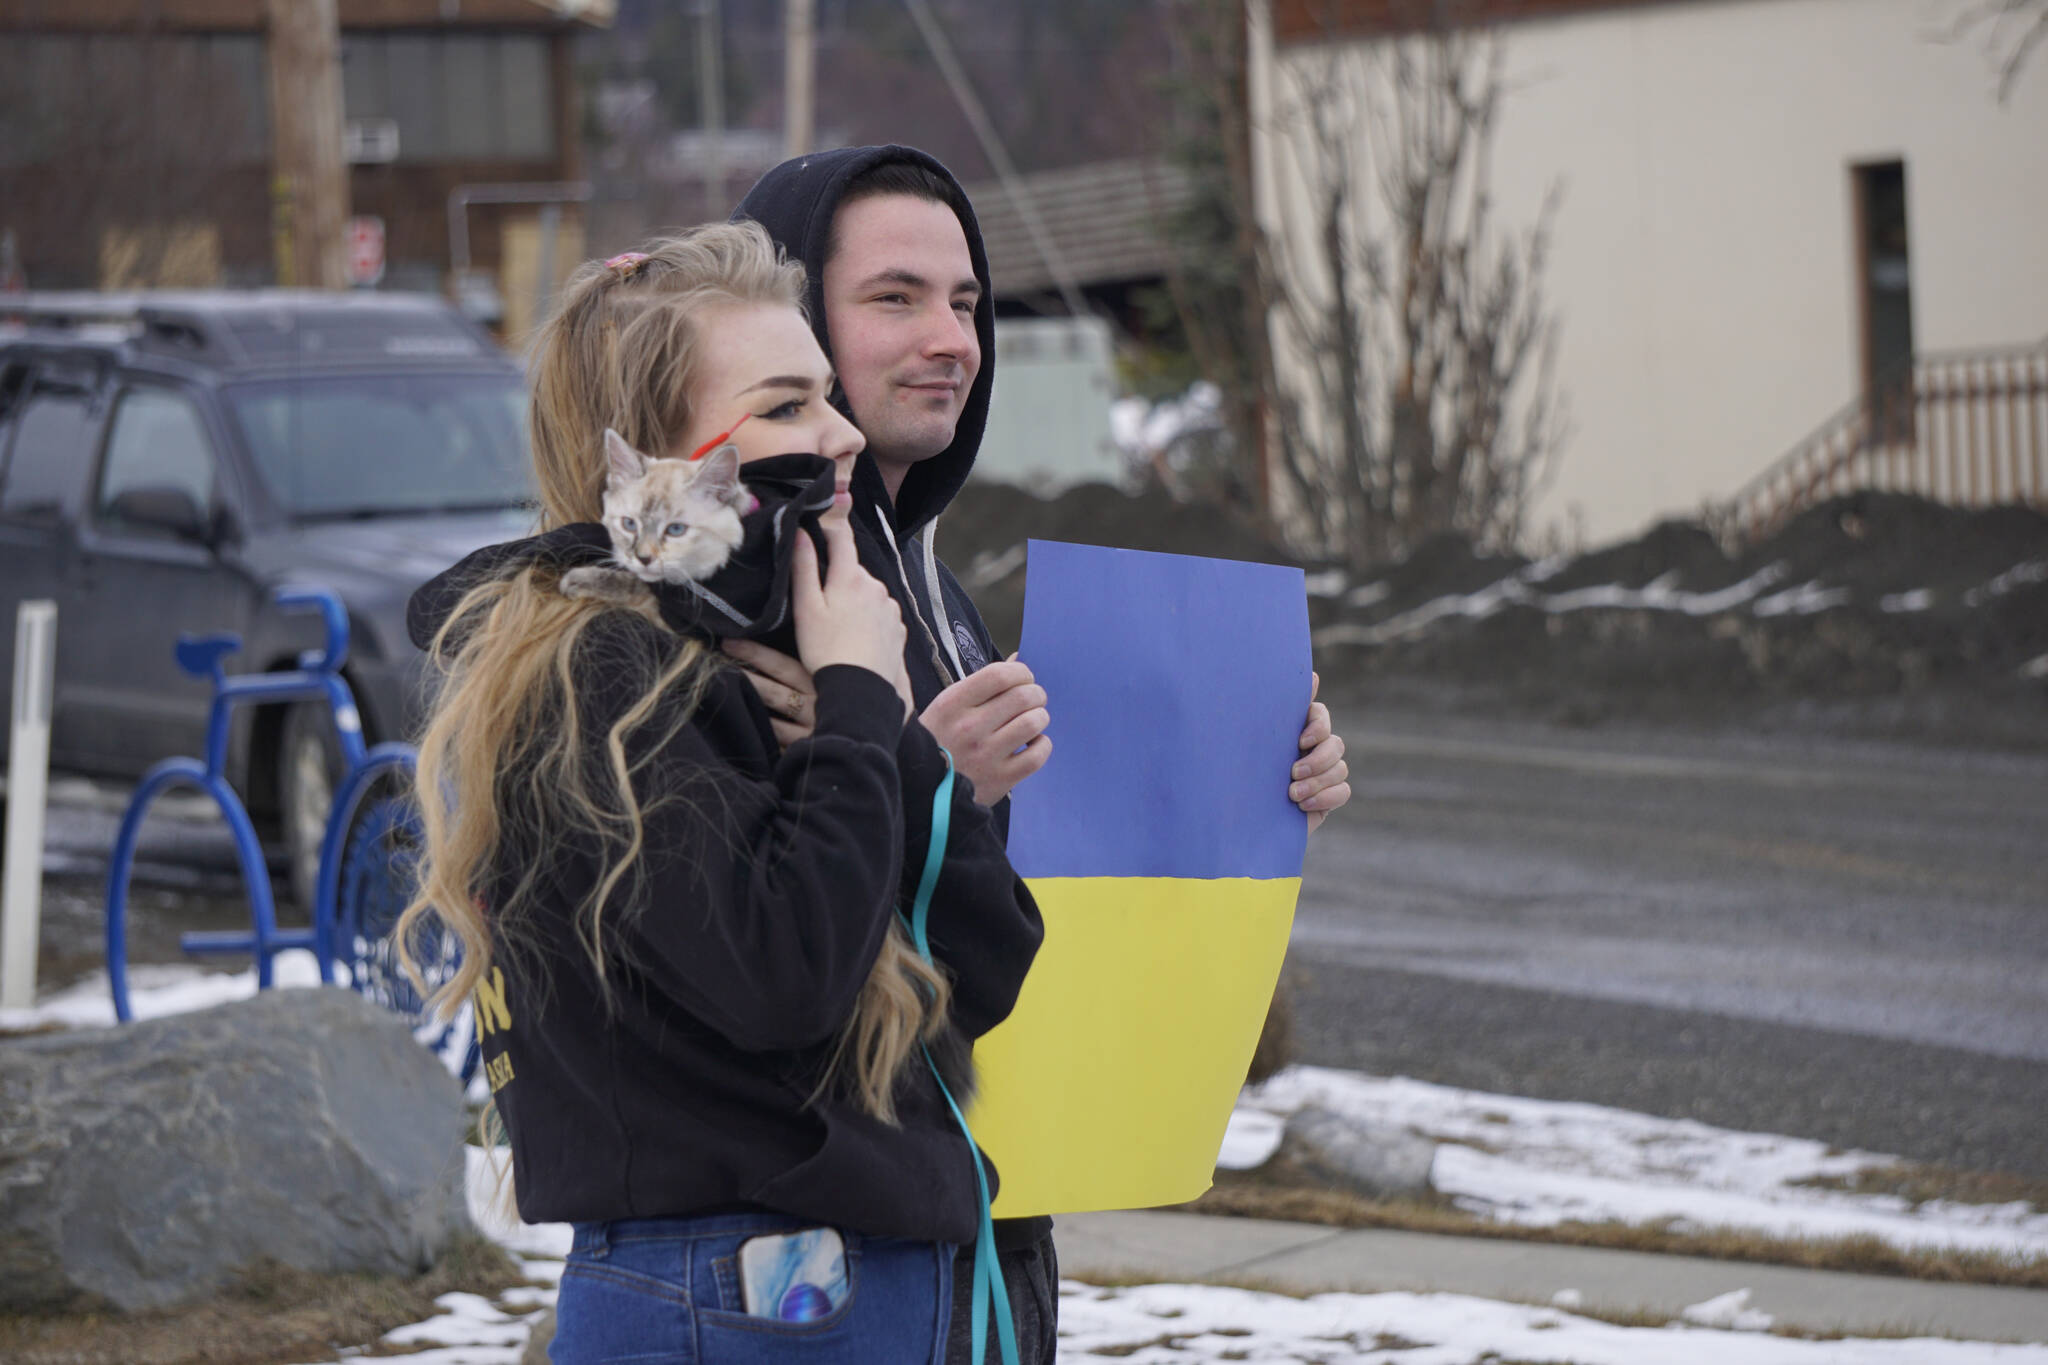 Audrey Wallace, left, holds her cat, Biscuit, while Alex Clayton, right, displays the Ukrainian flag at a demonstration Thursday, March 3, 2022, in support of Ukraine and against the Russian invasion. (Photo by Michael Armstrong/Homer News)